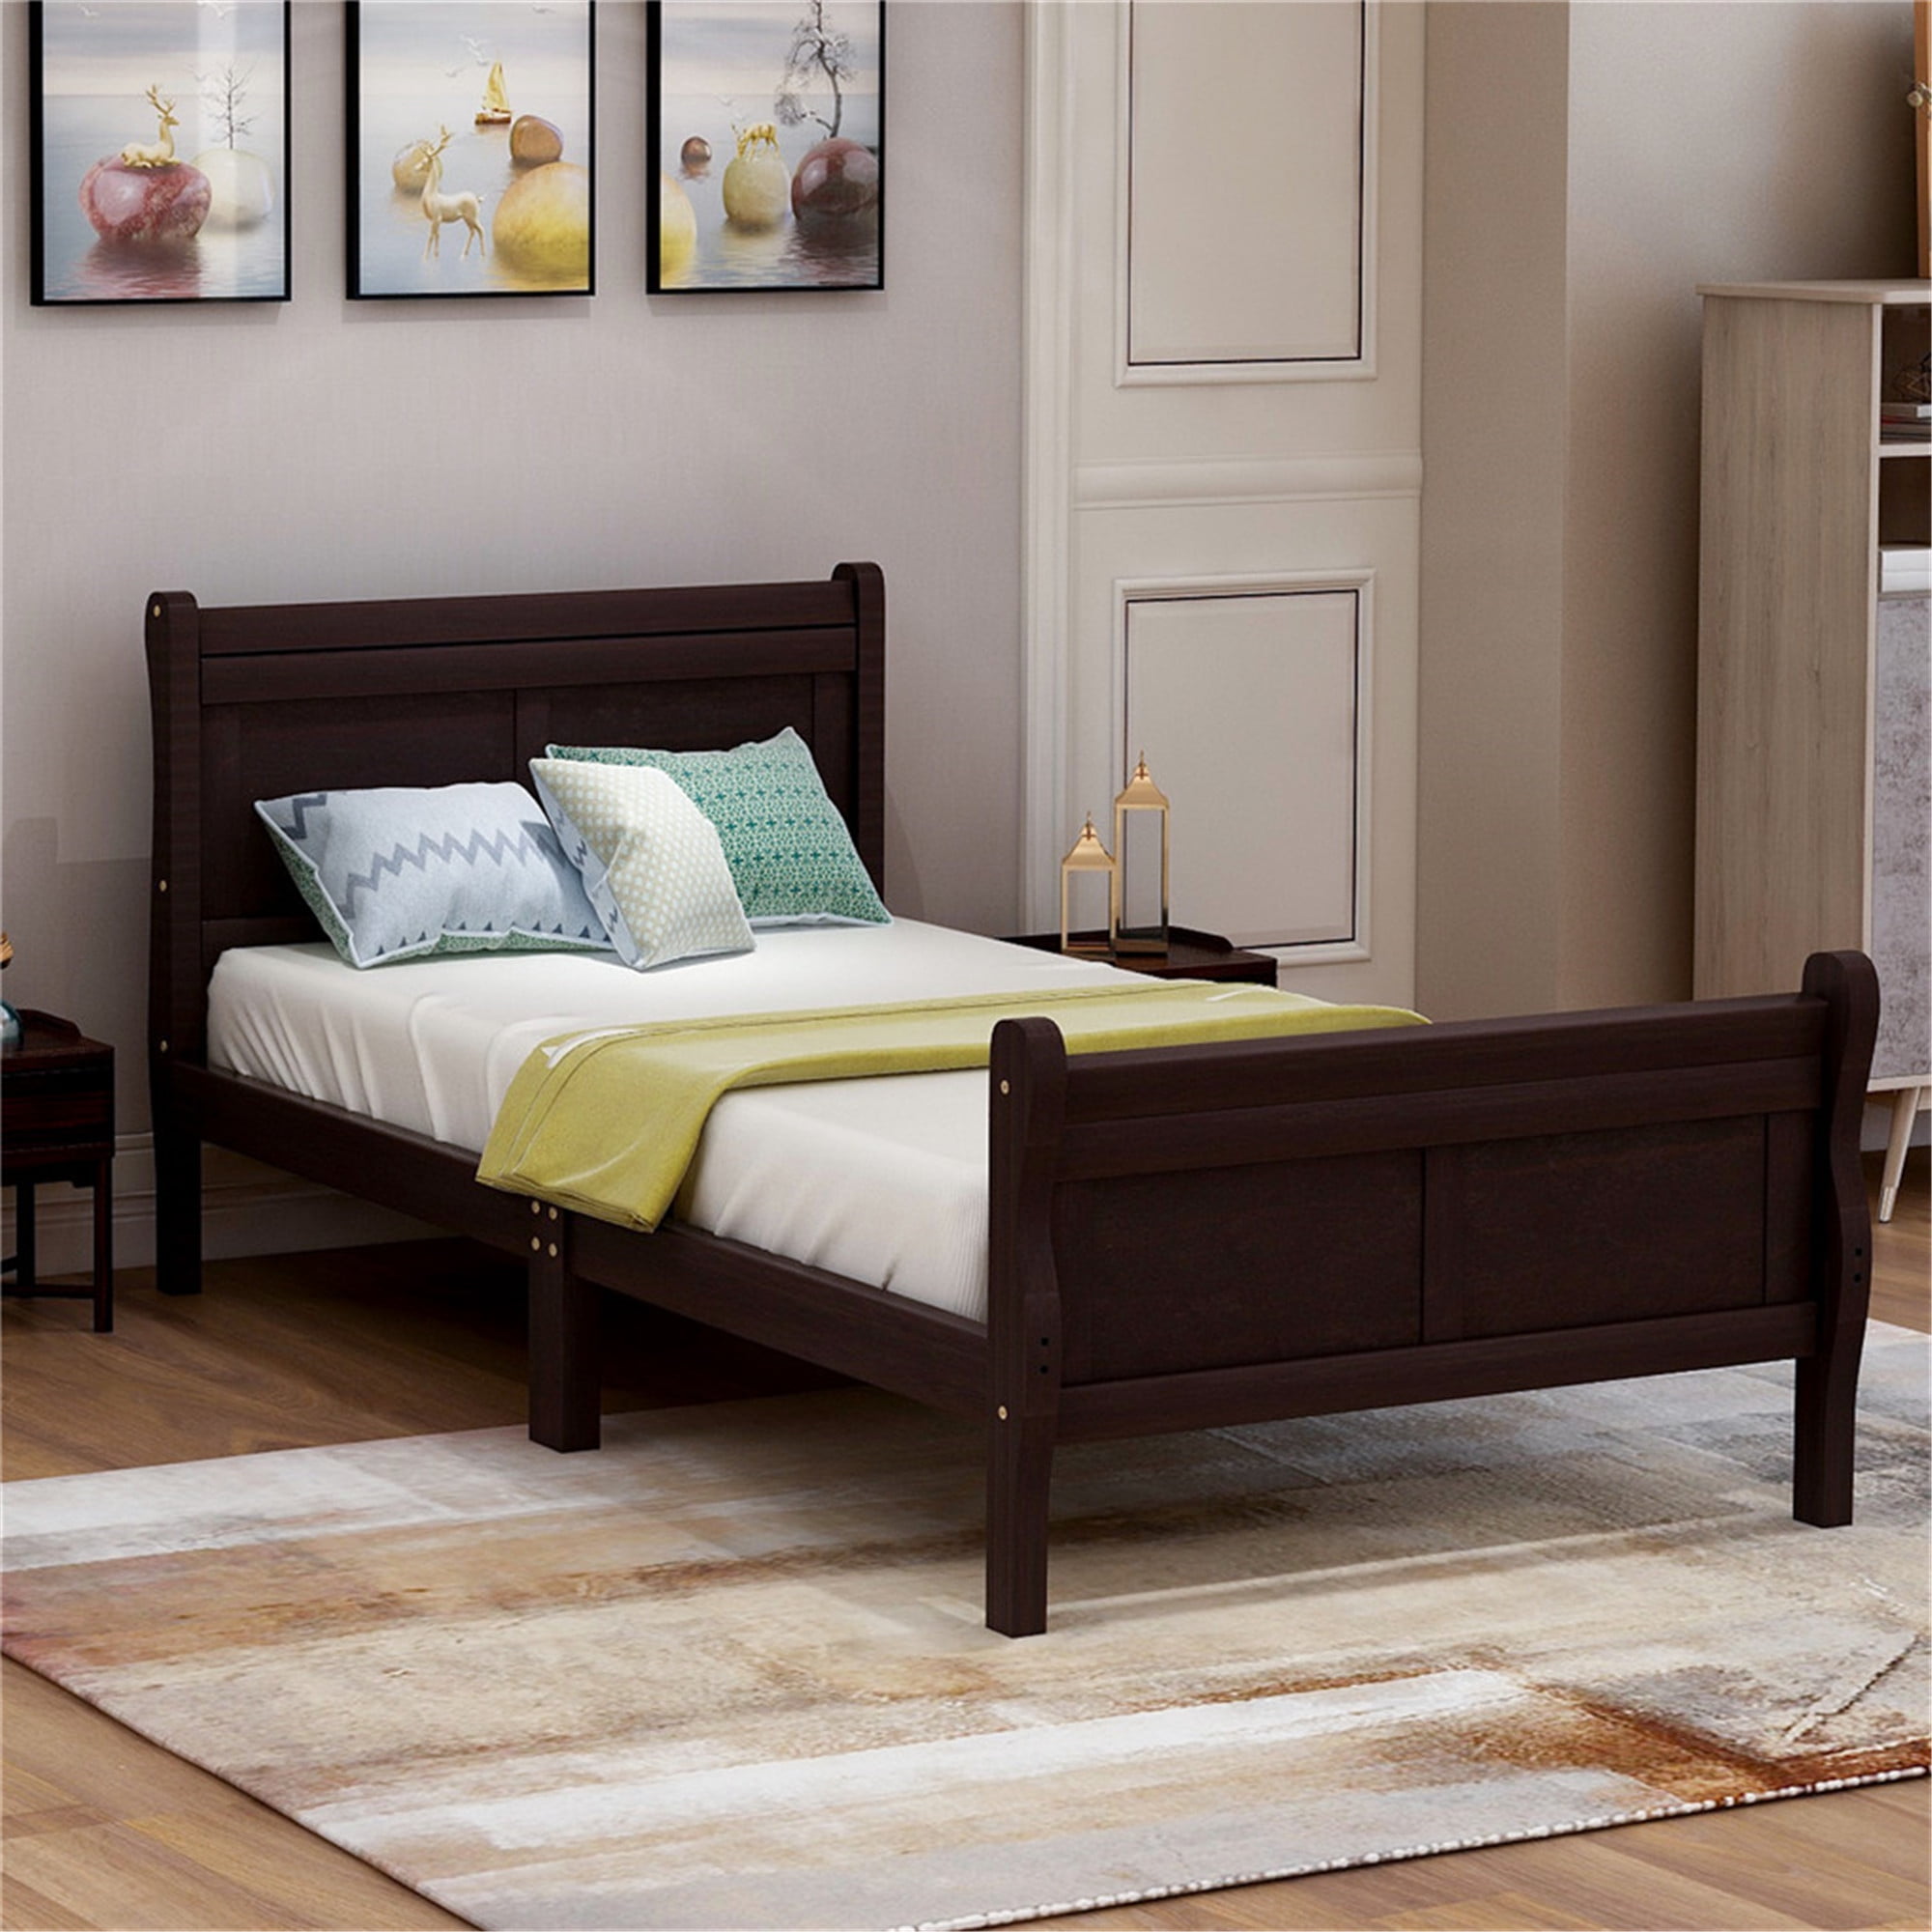 twin size bed frame Twin size platform bed with 2 drawers and wheels